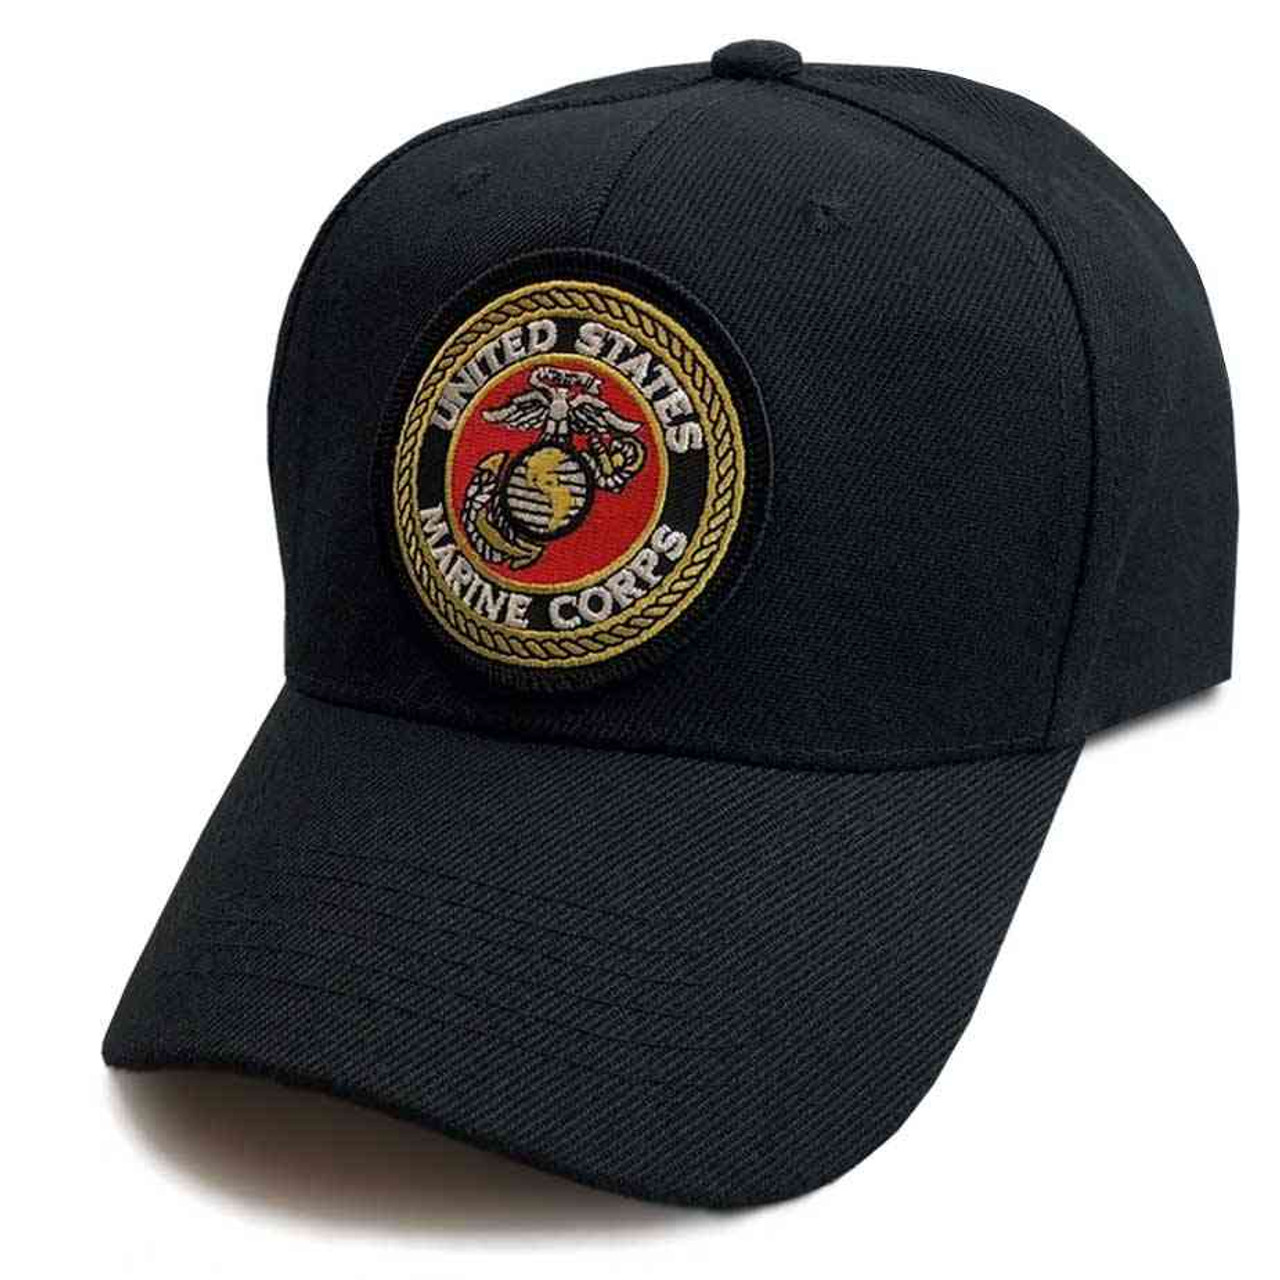 u s marine corps special edition hat in black